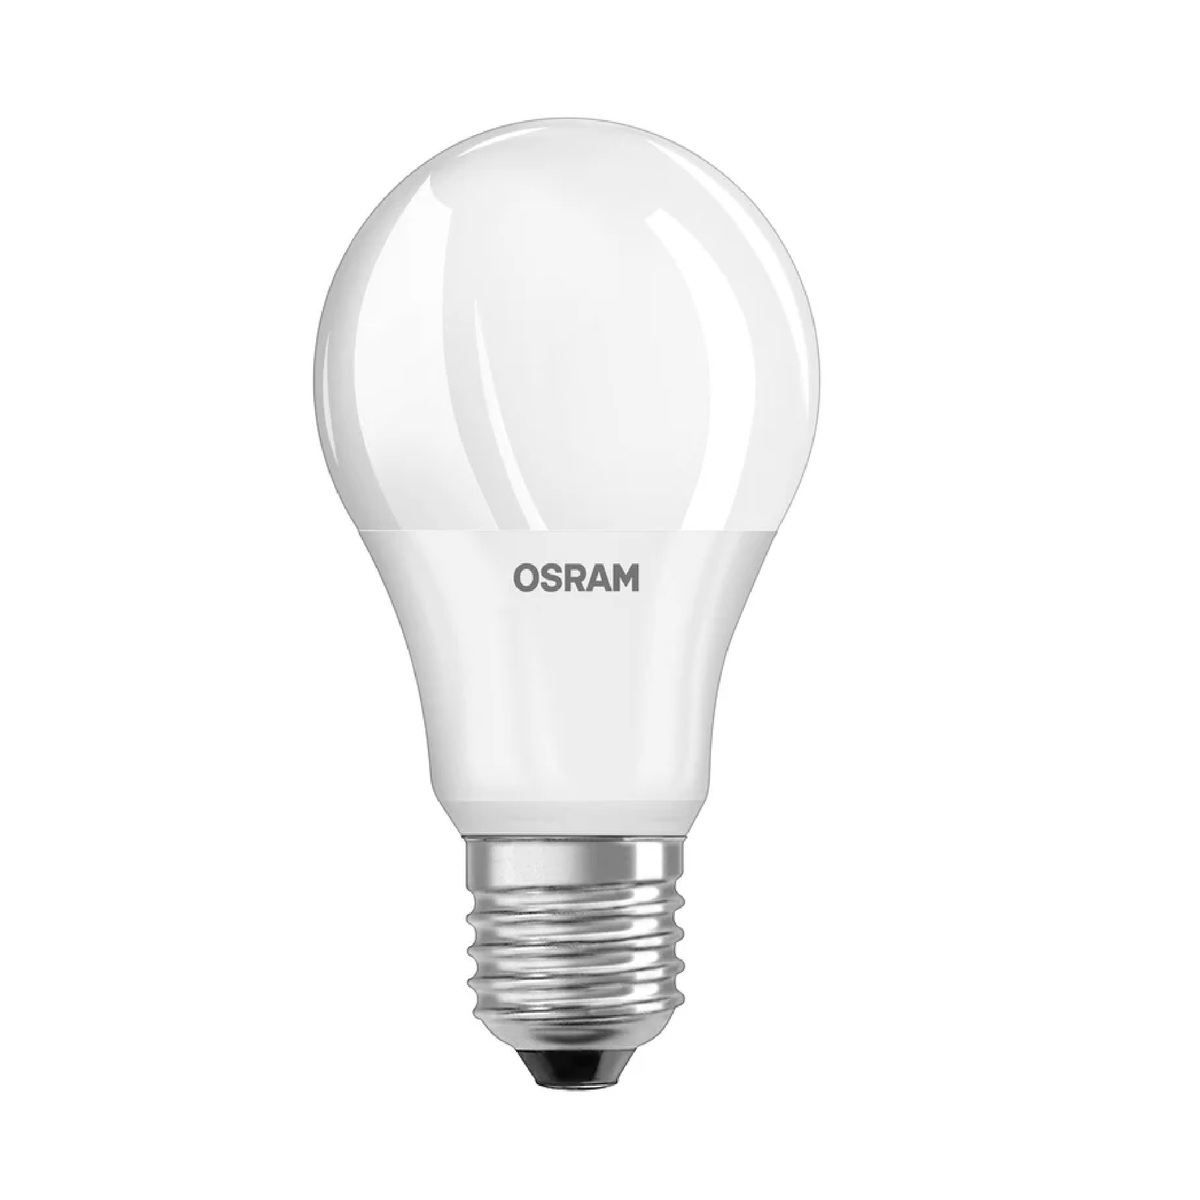 Osram Anti Bacterial E27 Frosted Screw LED Bulb, 8.5 W, Classic Day Light